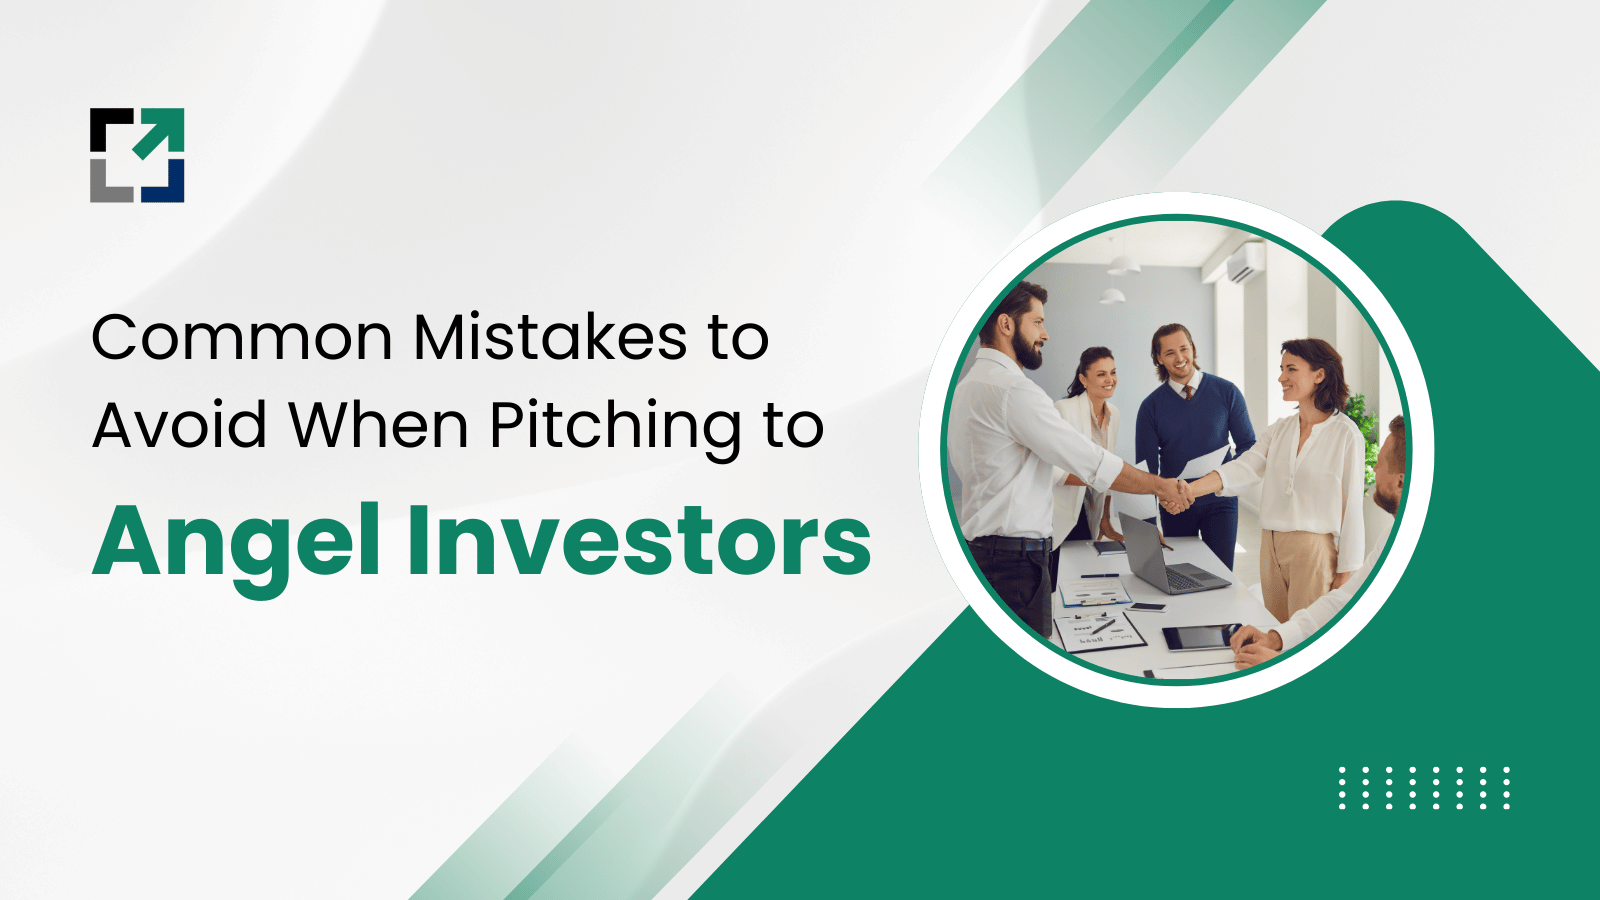 Common Mistakes to Avoid When Pitching to Angel Investors